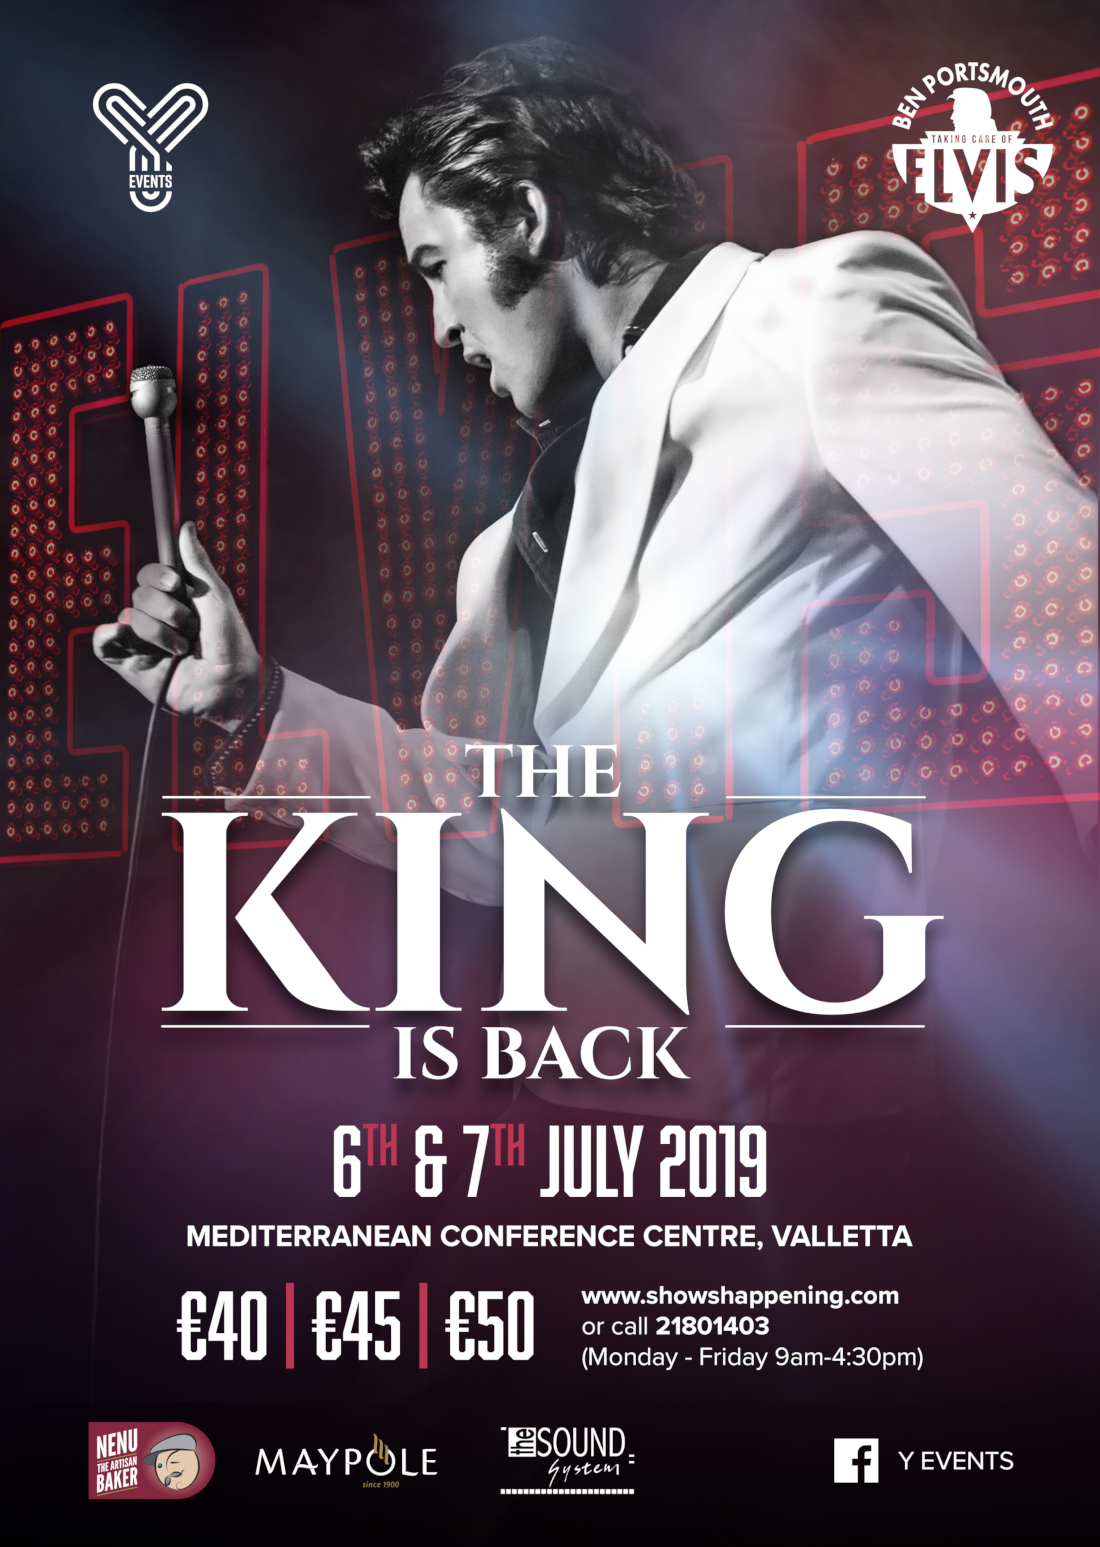 The King is Back – The Elvis show poster